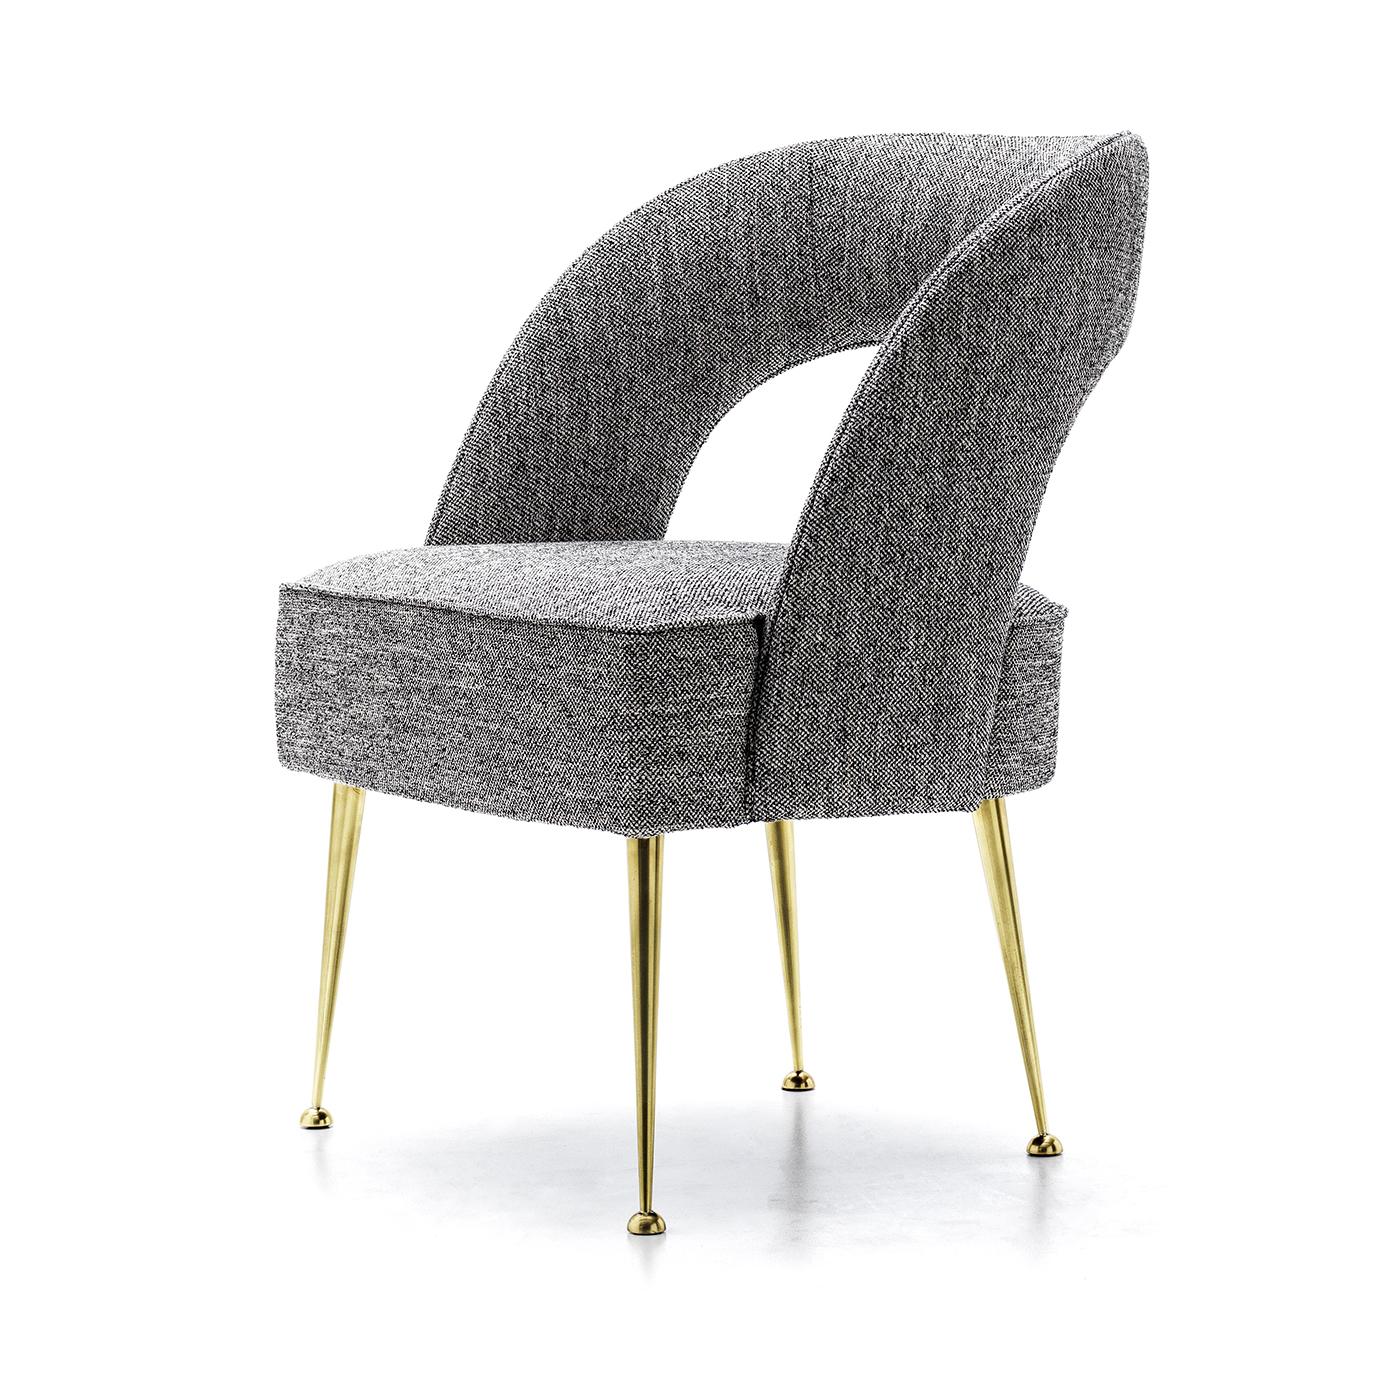 The Danu Lounge Chair is a polished piece with fabric upholstering and deluxe brass legs. It is a fantastic work that will fit anywhere, from new modern houses to more classic domestic spaces. Comfortable to sit on and of premium high quality, it